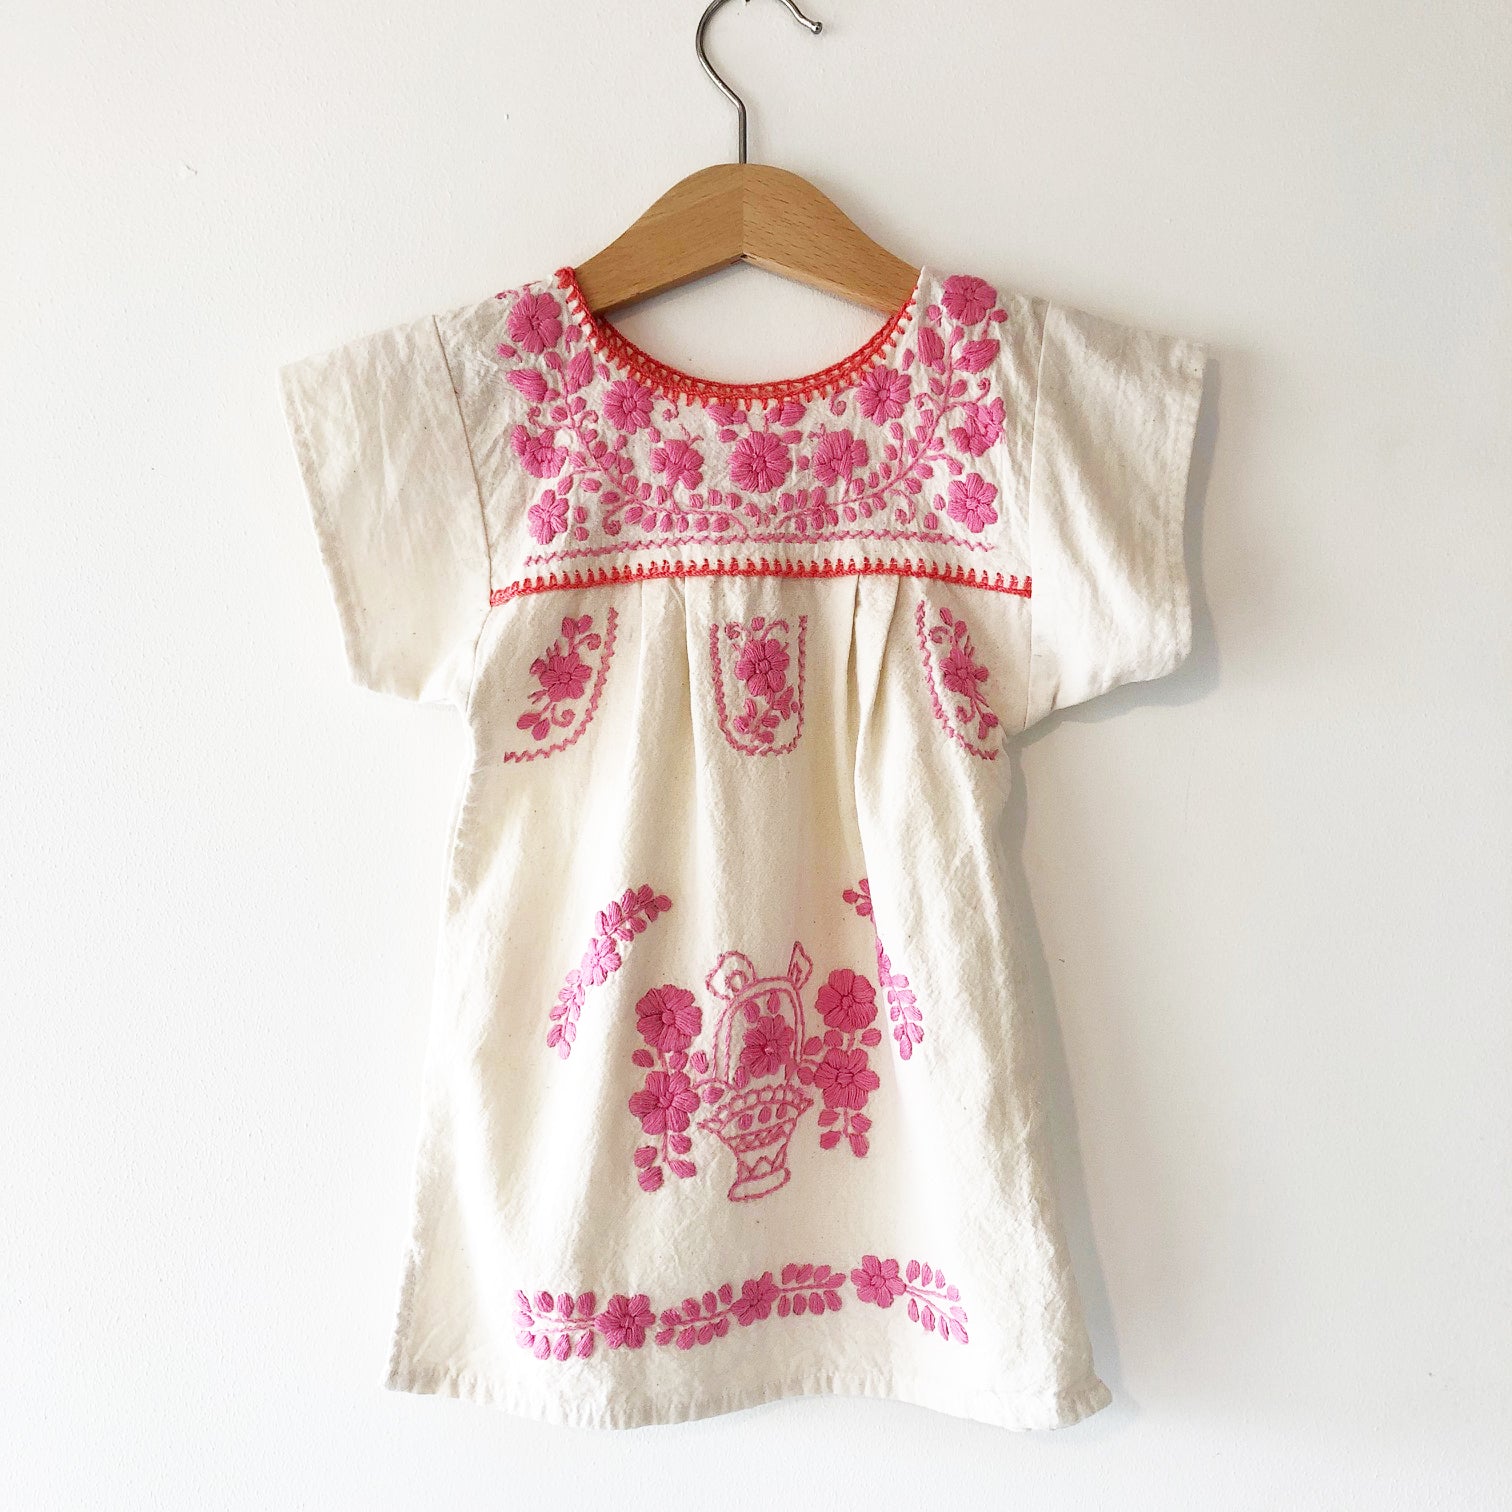 Oaxacan Embroidered Dress size 12 months